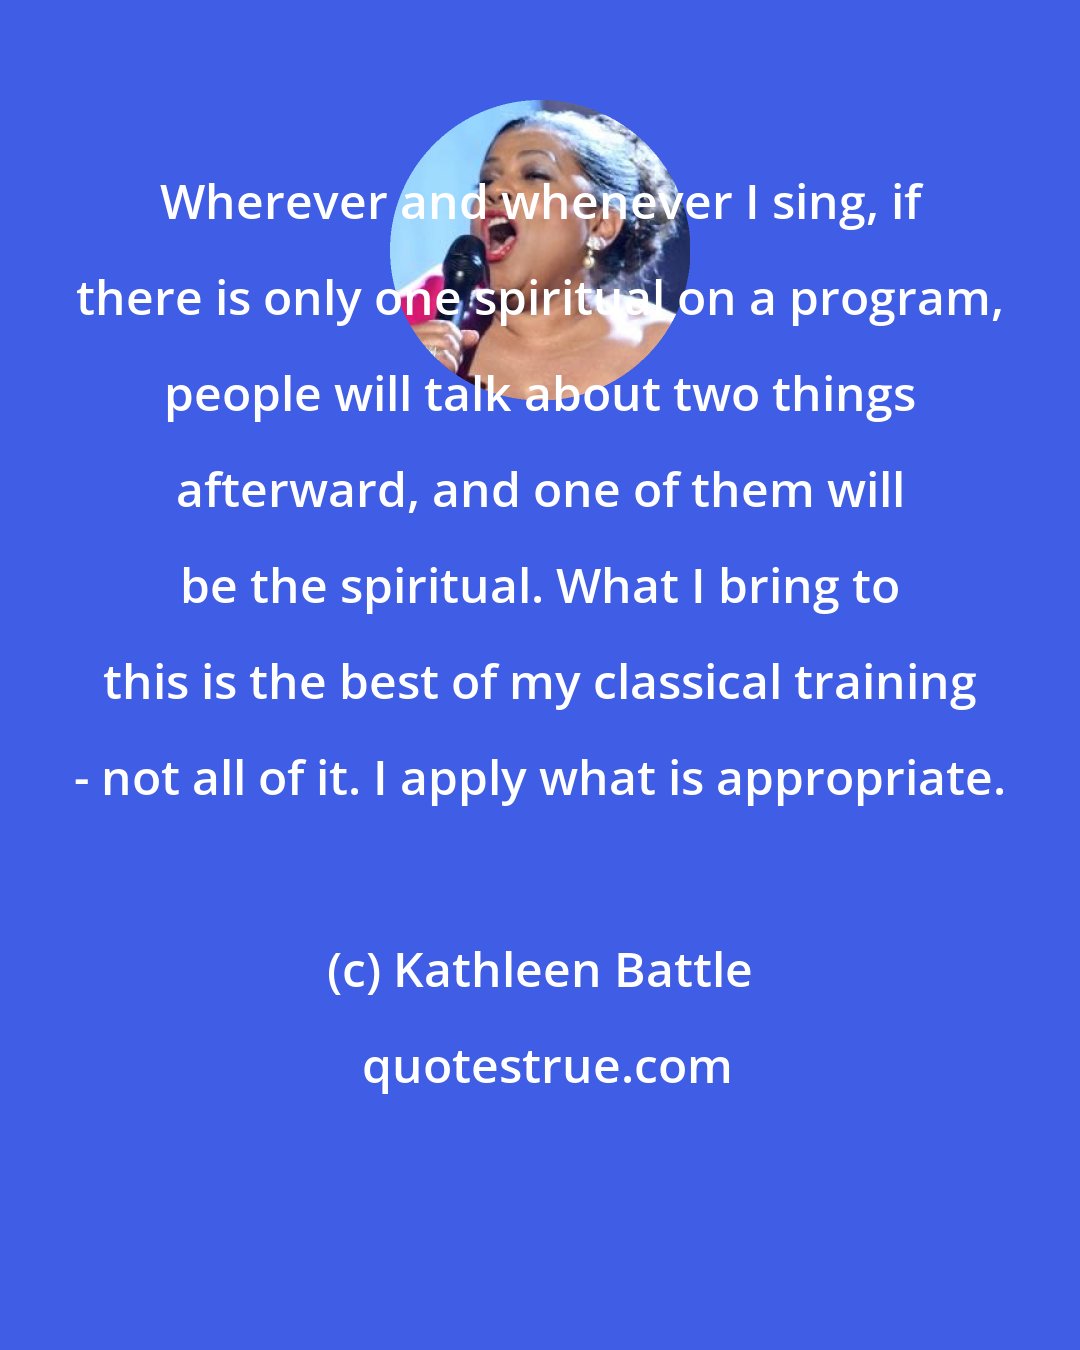 Kathleen Battle: Wherever and whenever I sing, if there is only one spiritual on a program, people will talk about two things afterward, and one of them will be the spiritual. What I bring to this is the best of my classical training - not all of it. I apply what is appropriate.